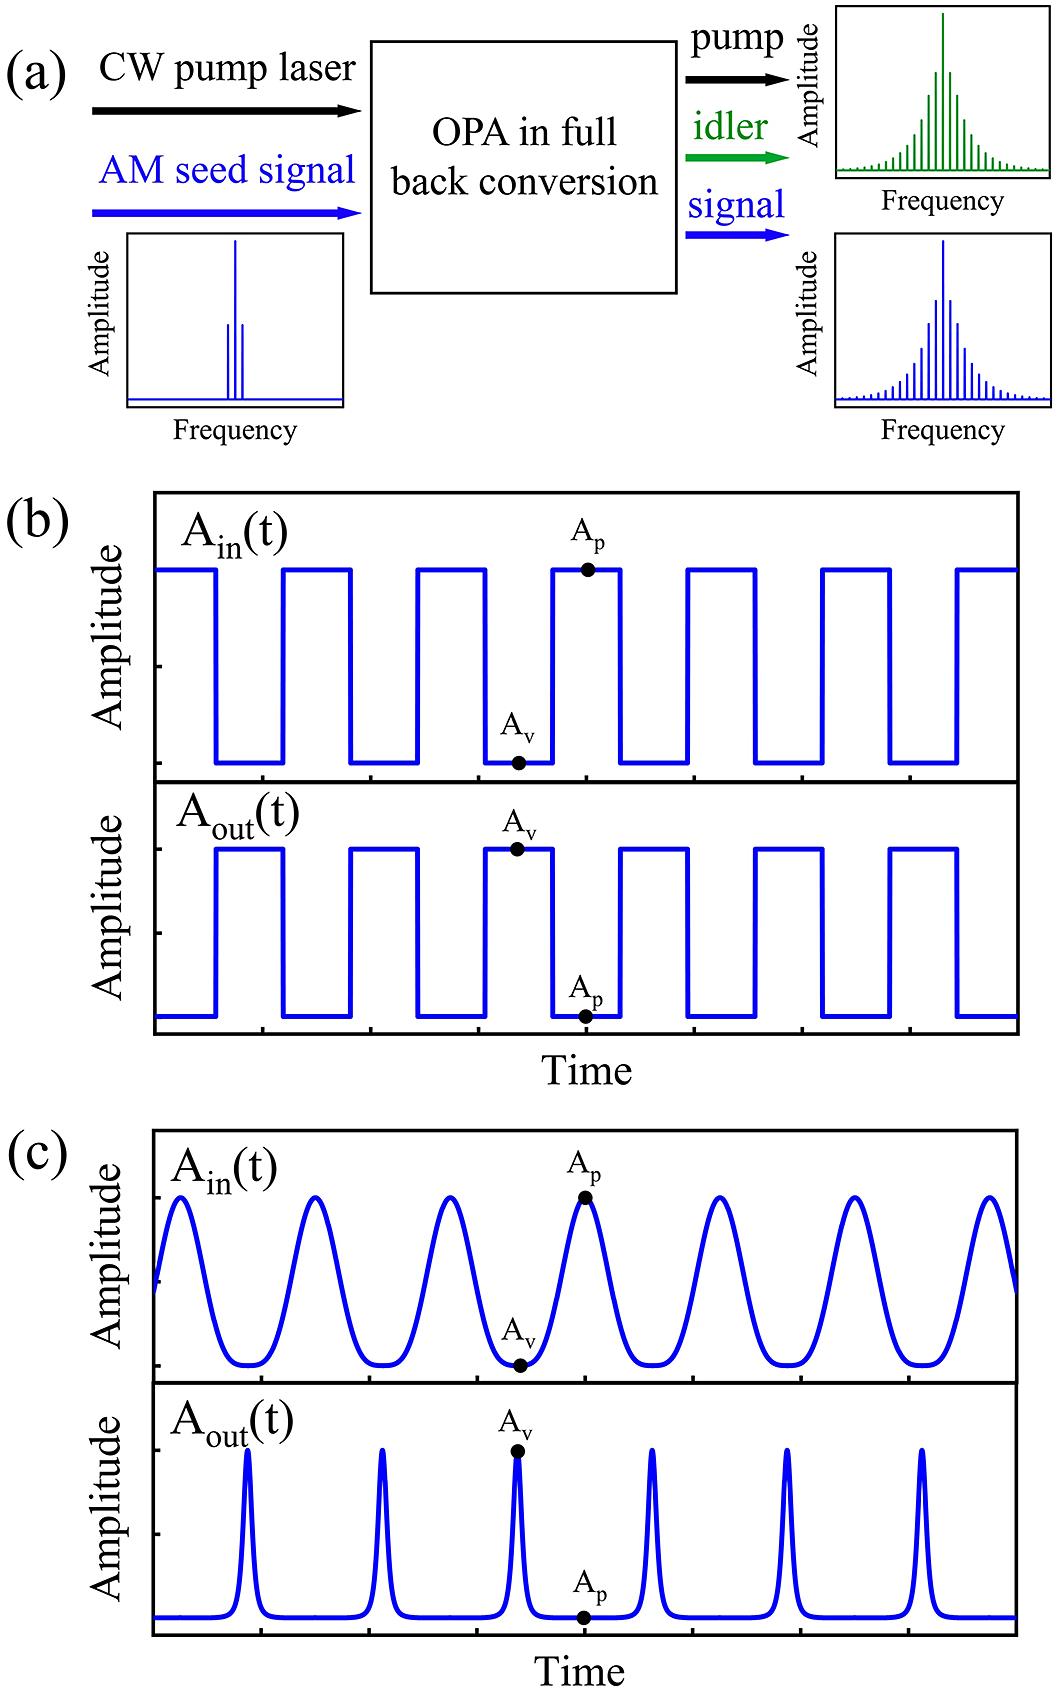 (a) Schematic of a χ(2)-based optical modulator that provides a reciprocal-type transfer function. It consists of an OPA that is pumped by a quasi-continuous-wave laser and seeded by an amplitude-modulated (AM) laser. The output signal waveforms Aout(t) calculated for (b) a square-modulated seed signal Ain(t) and for (c) a sinusoidal AM seed signal Ain(t). Here, Ap and Av denote the modulation peak and valley of a sinusoidal AM seed signal.